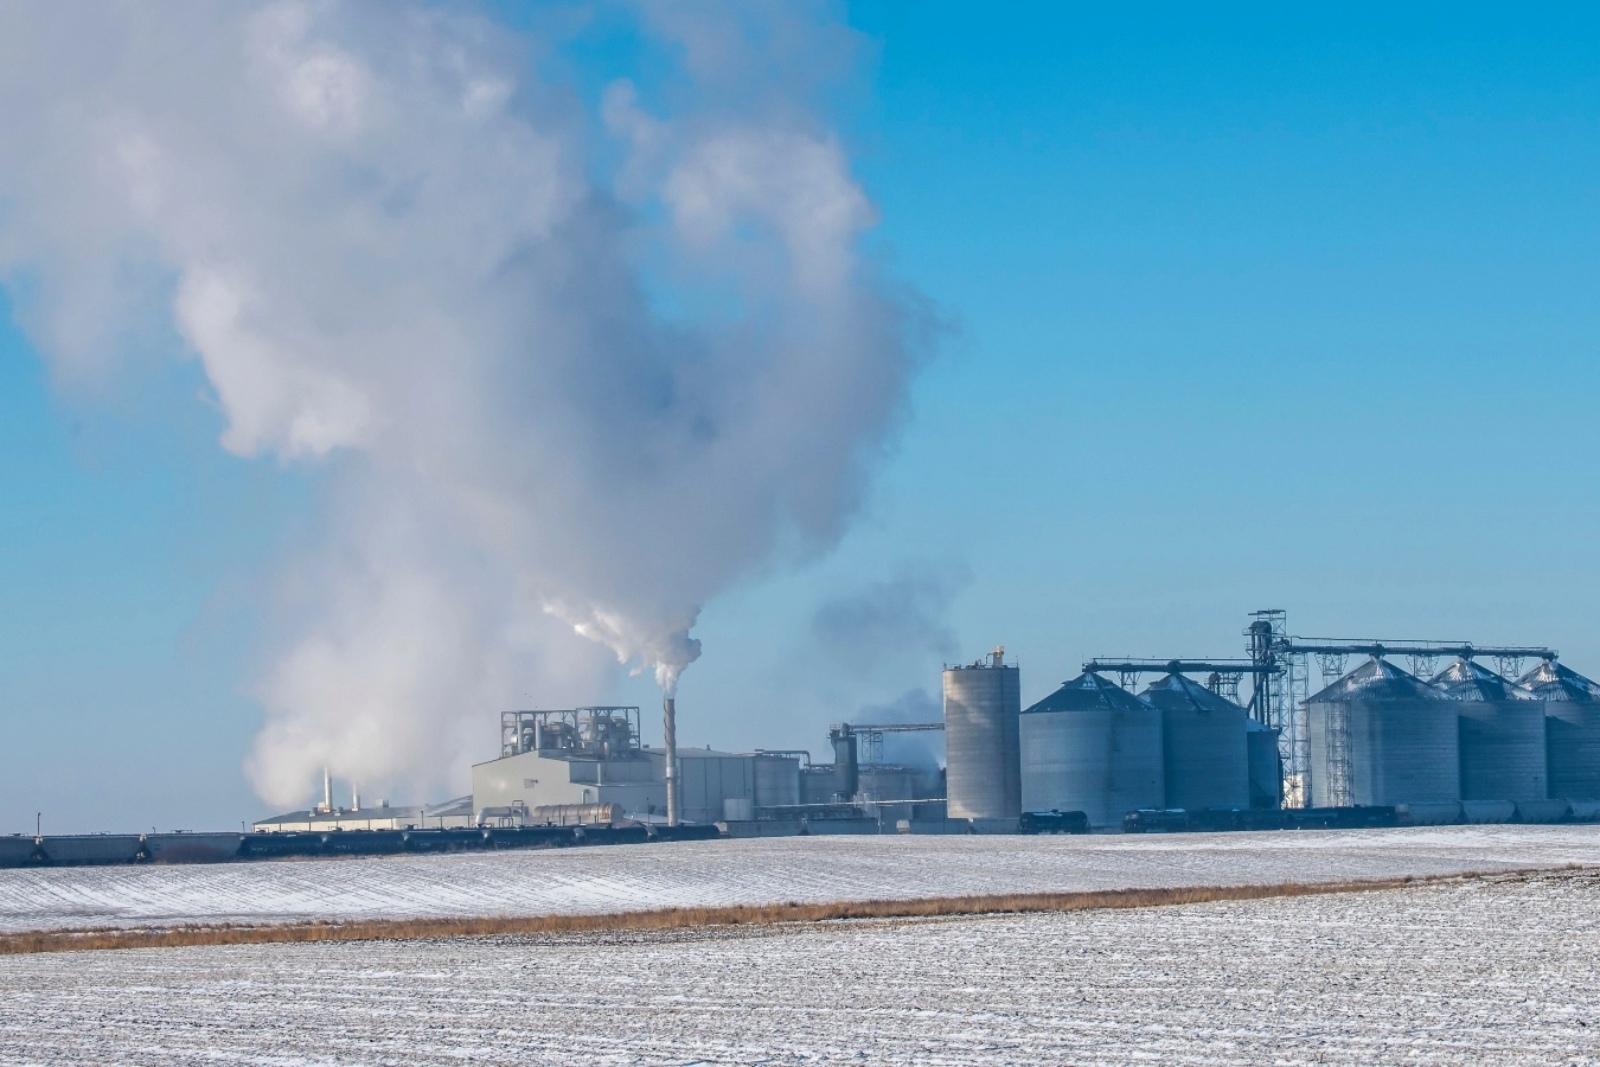 Image of an ethanol plant in Jewell, Iowa, spewing emissions.